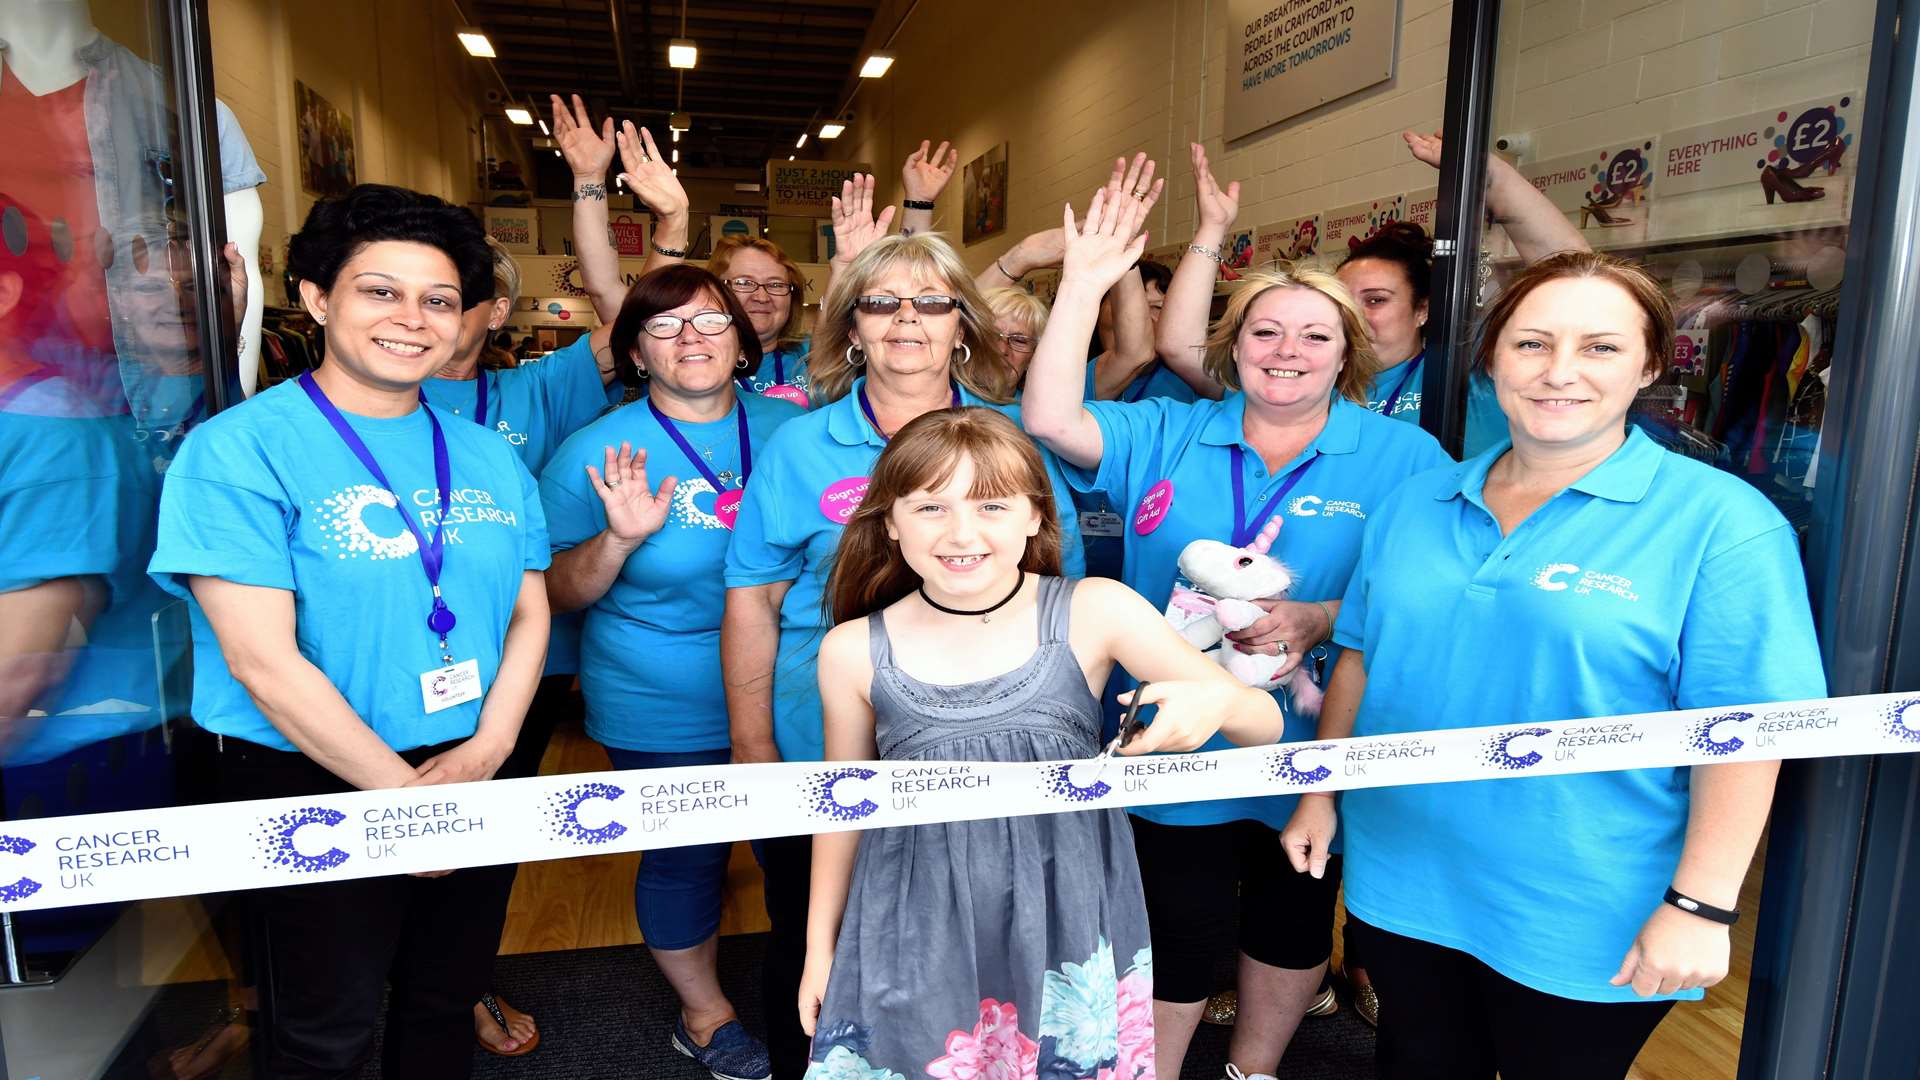 Georgina Bover, who battled back from cancer, opens the new Cancer Research UK superstore in Crayford